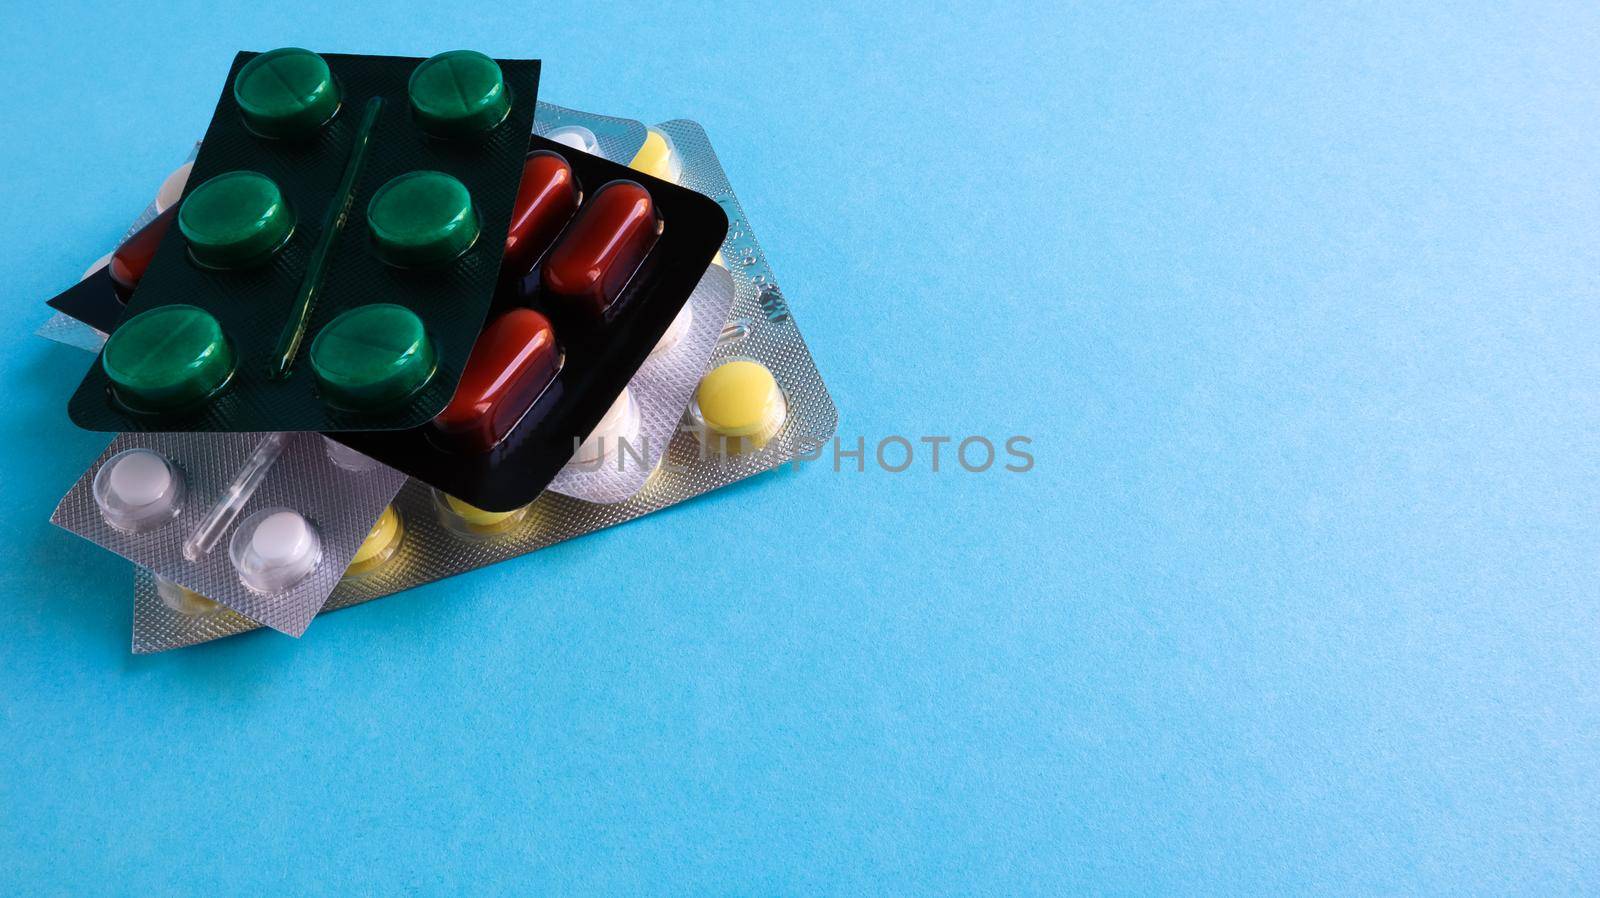 Packs of pills of various shapes and colors are stacked on a blue background. Capsules are packaged in blister packs. Different medicines. Drug treatment. Health photo. Copy space